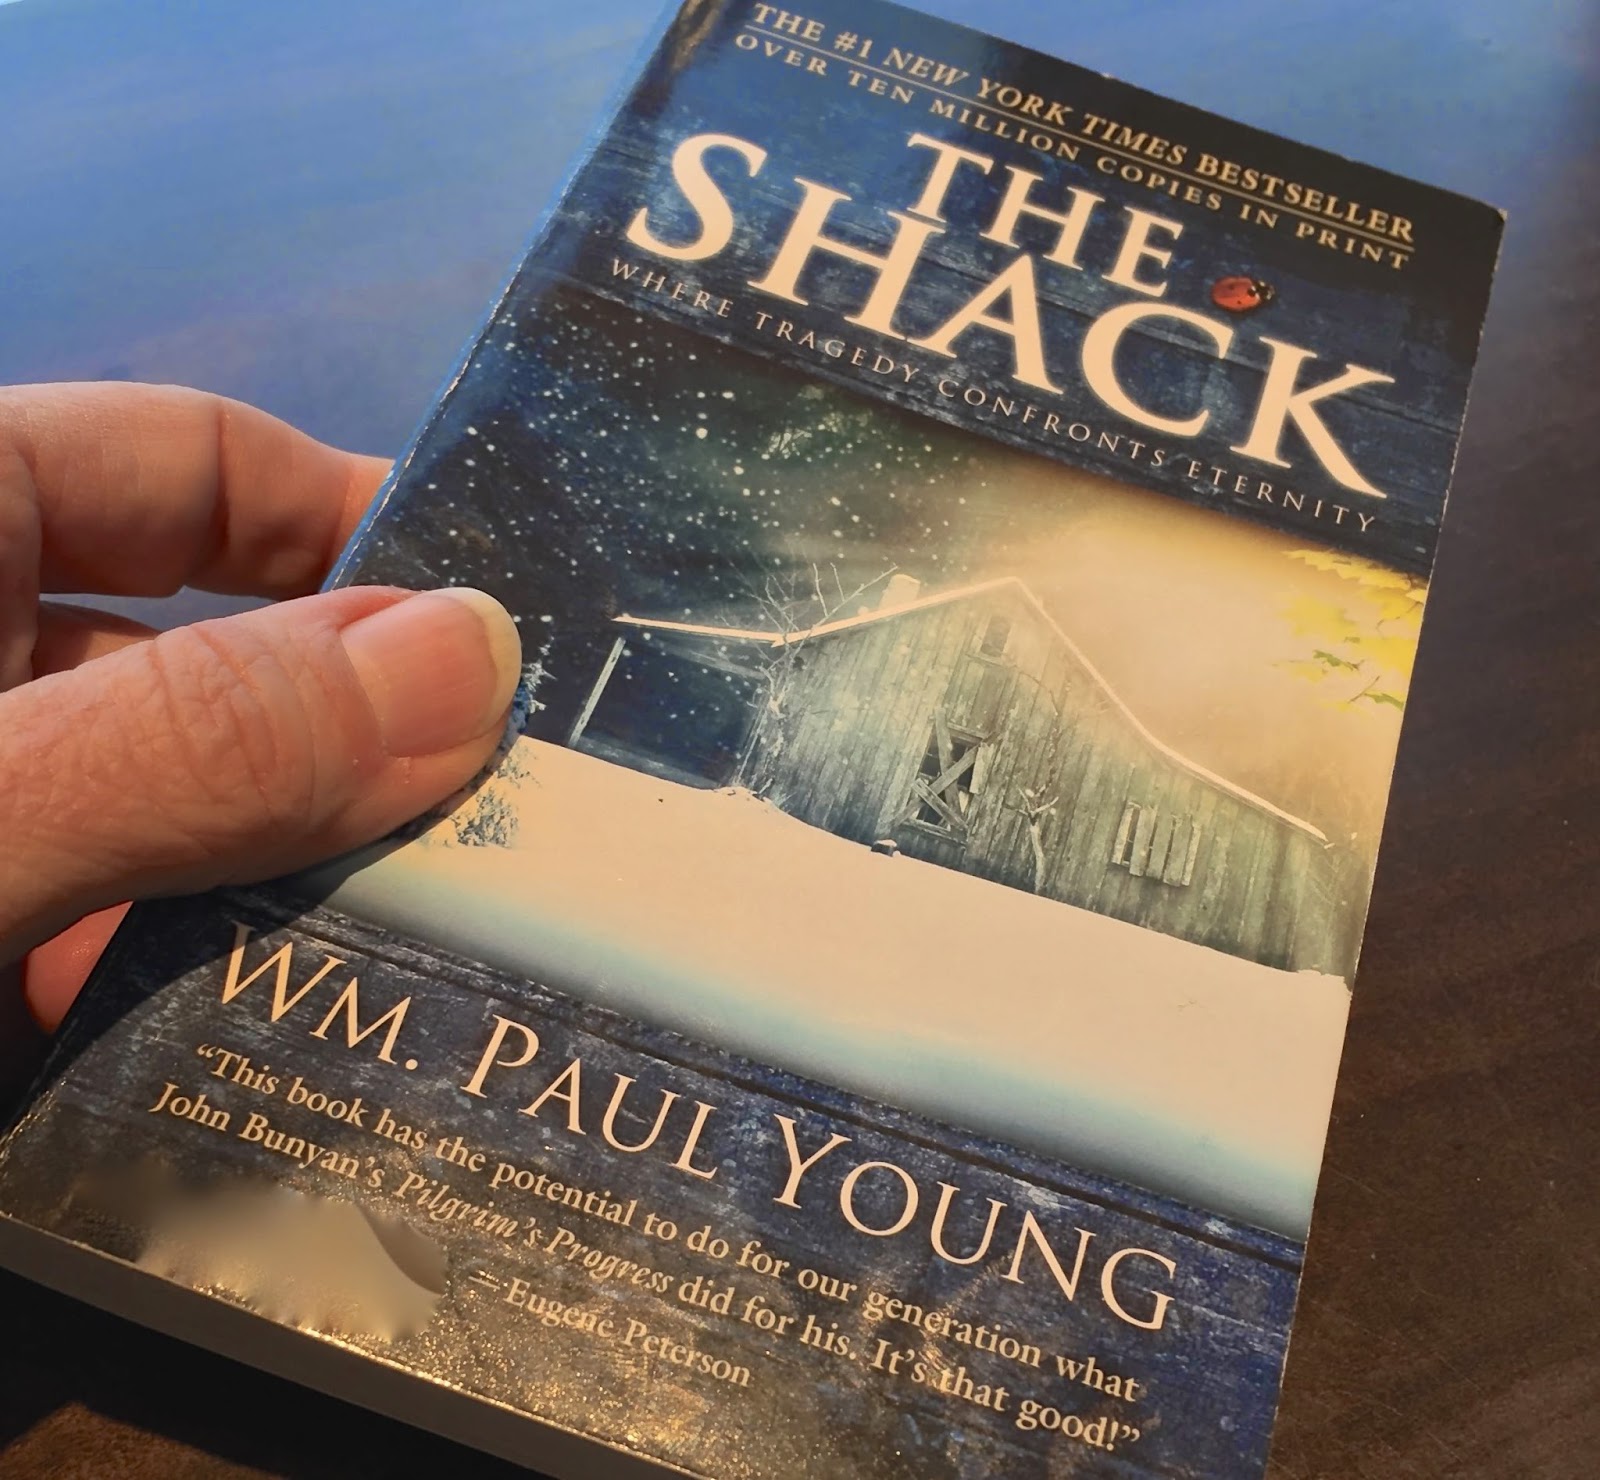 the shack book author